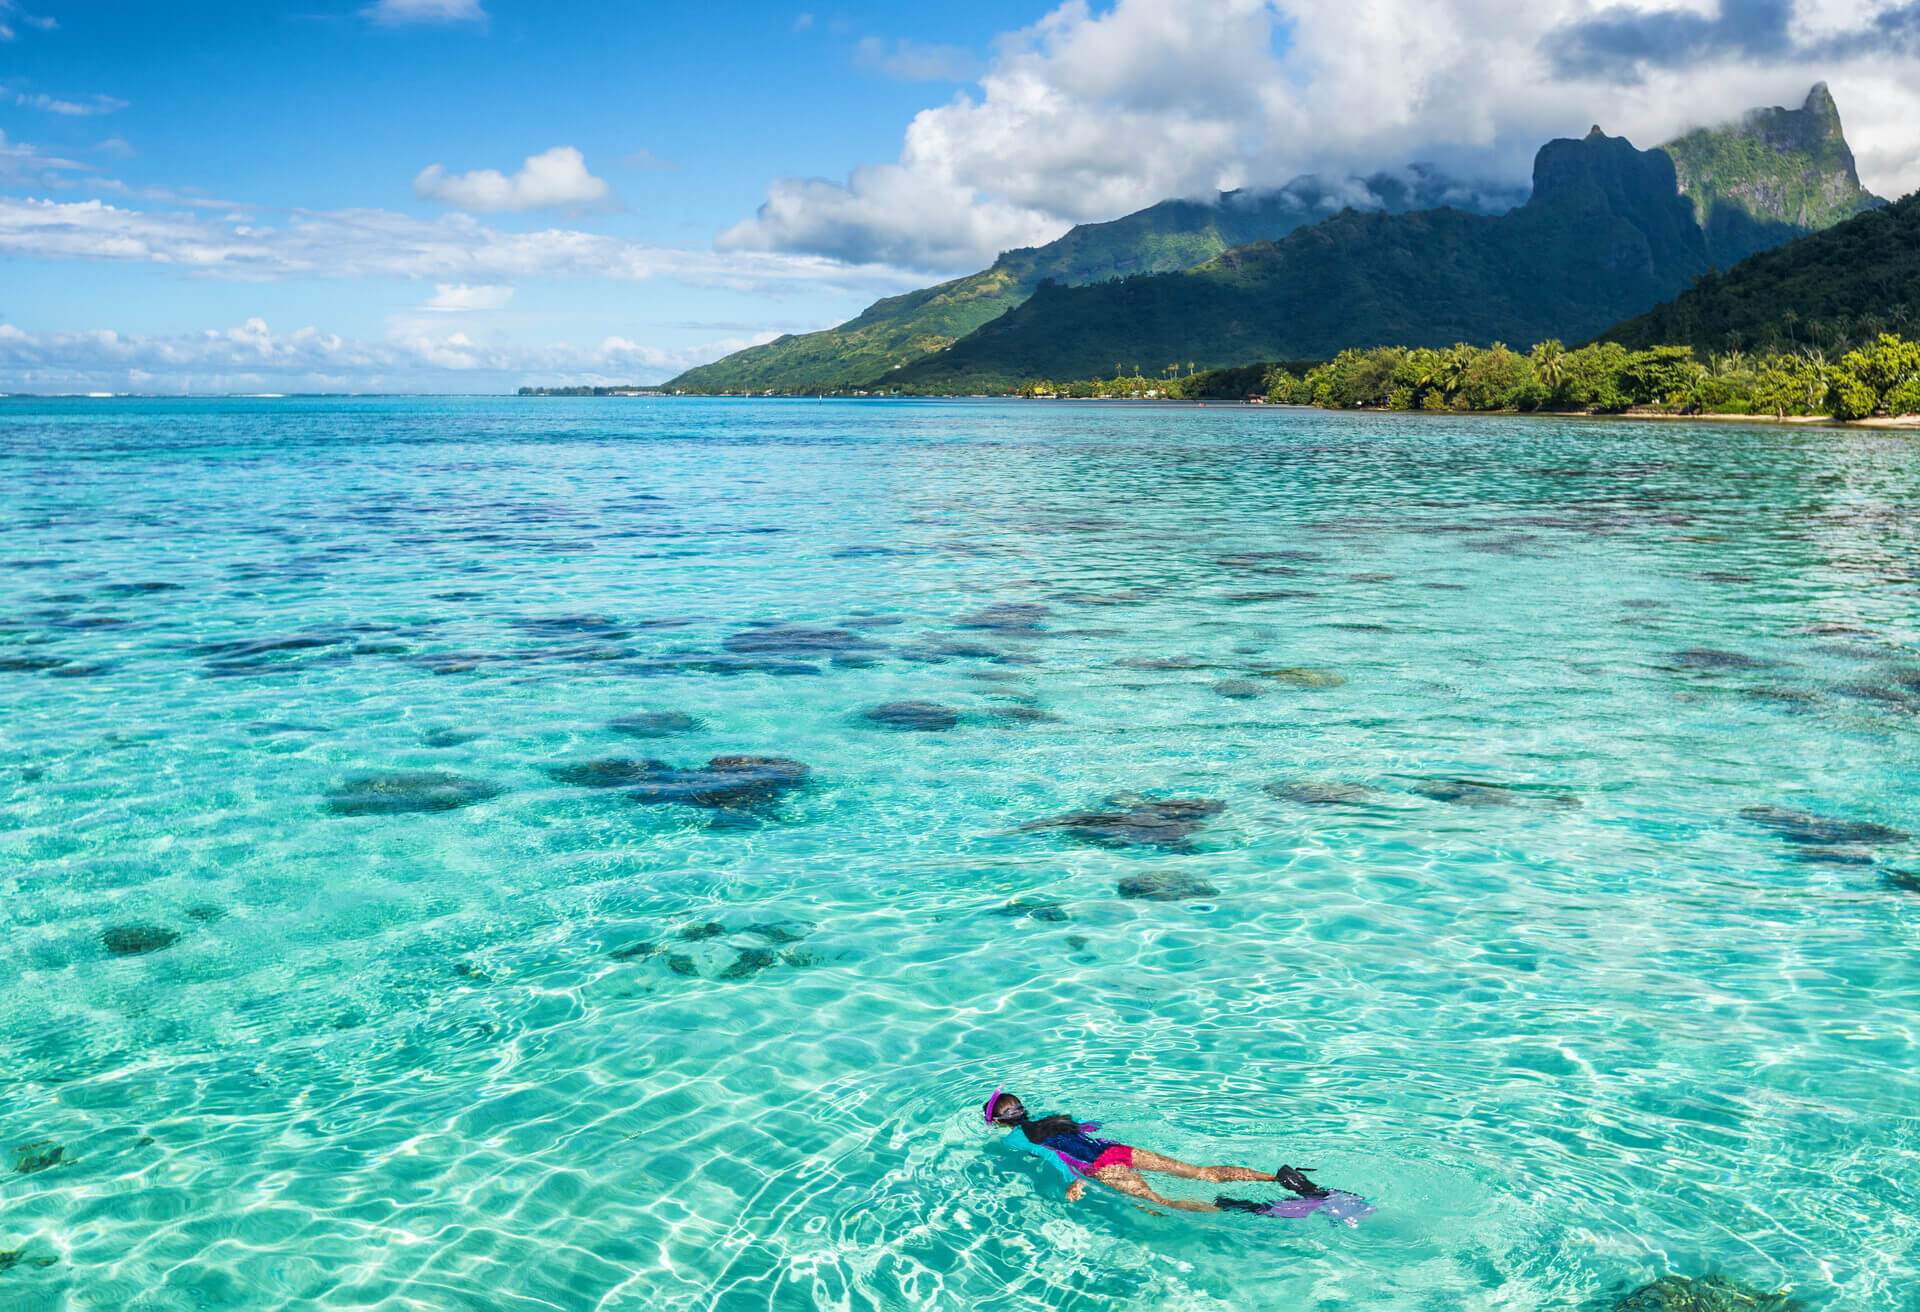 dest_french_polynesia_moorea_theme_snorkeling_shutterstock_730393618_universal_within